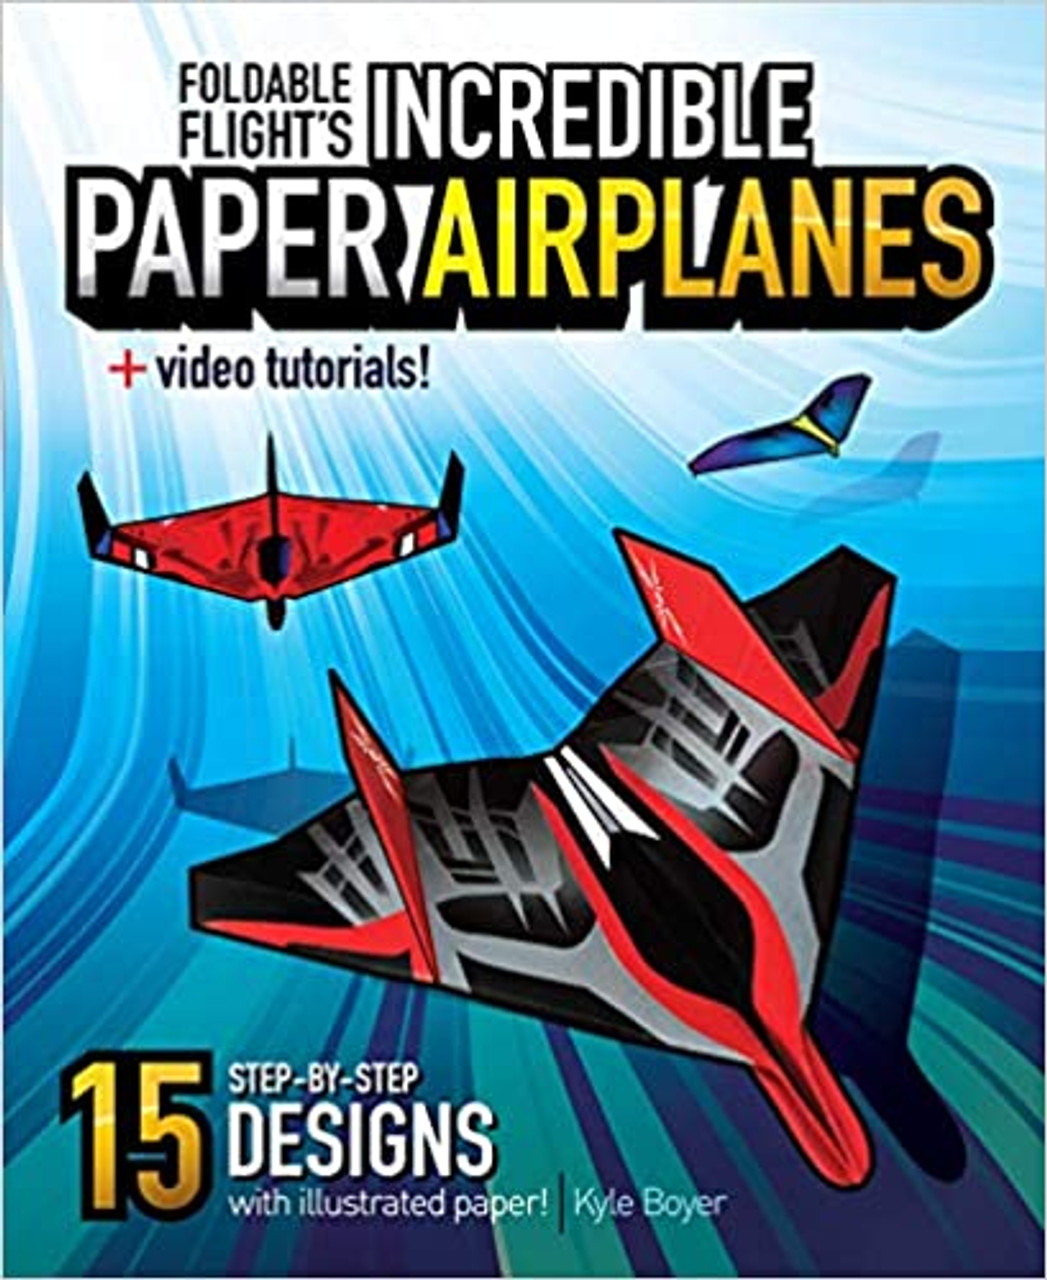 4D paper airplane - Model Kit, Paper Airplane Template